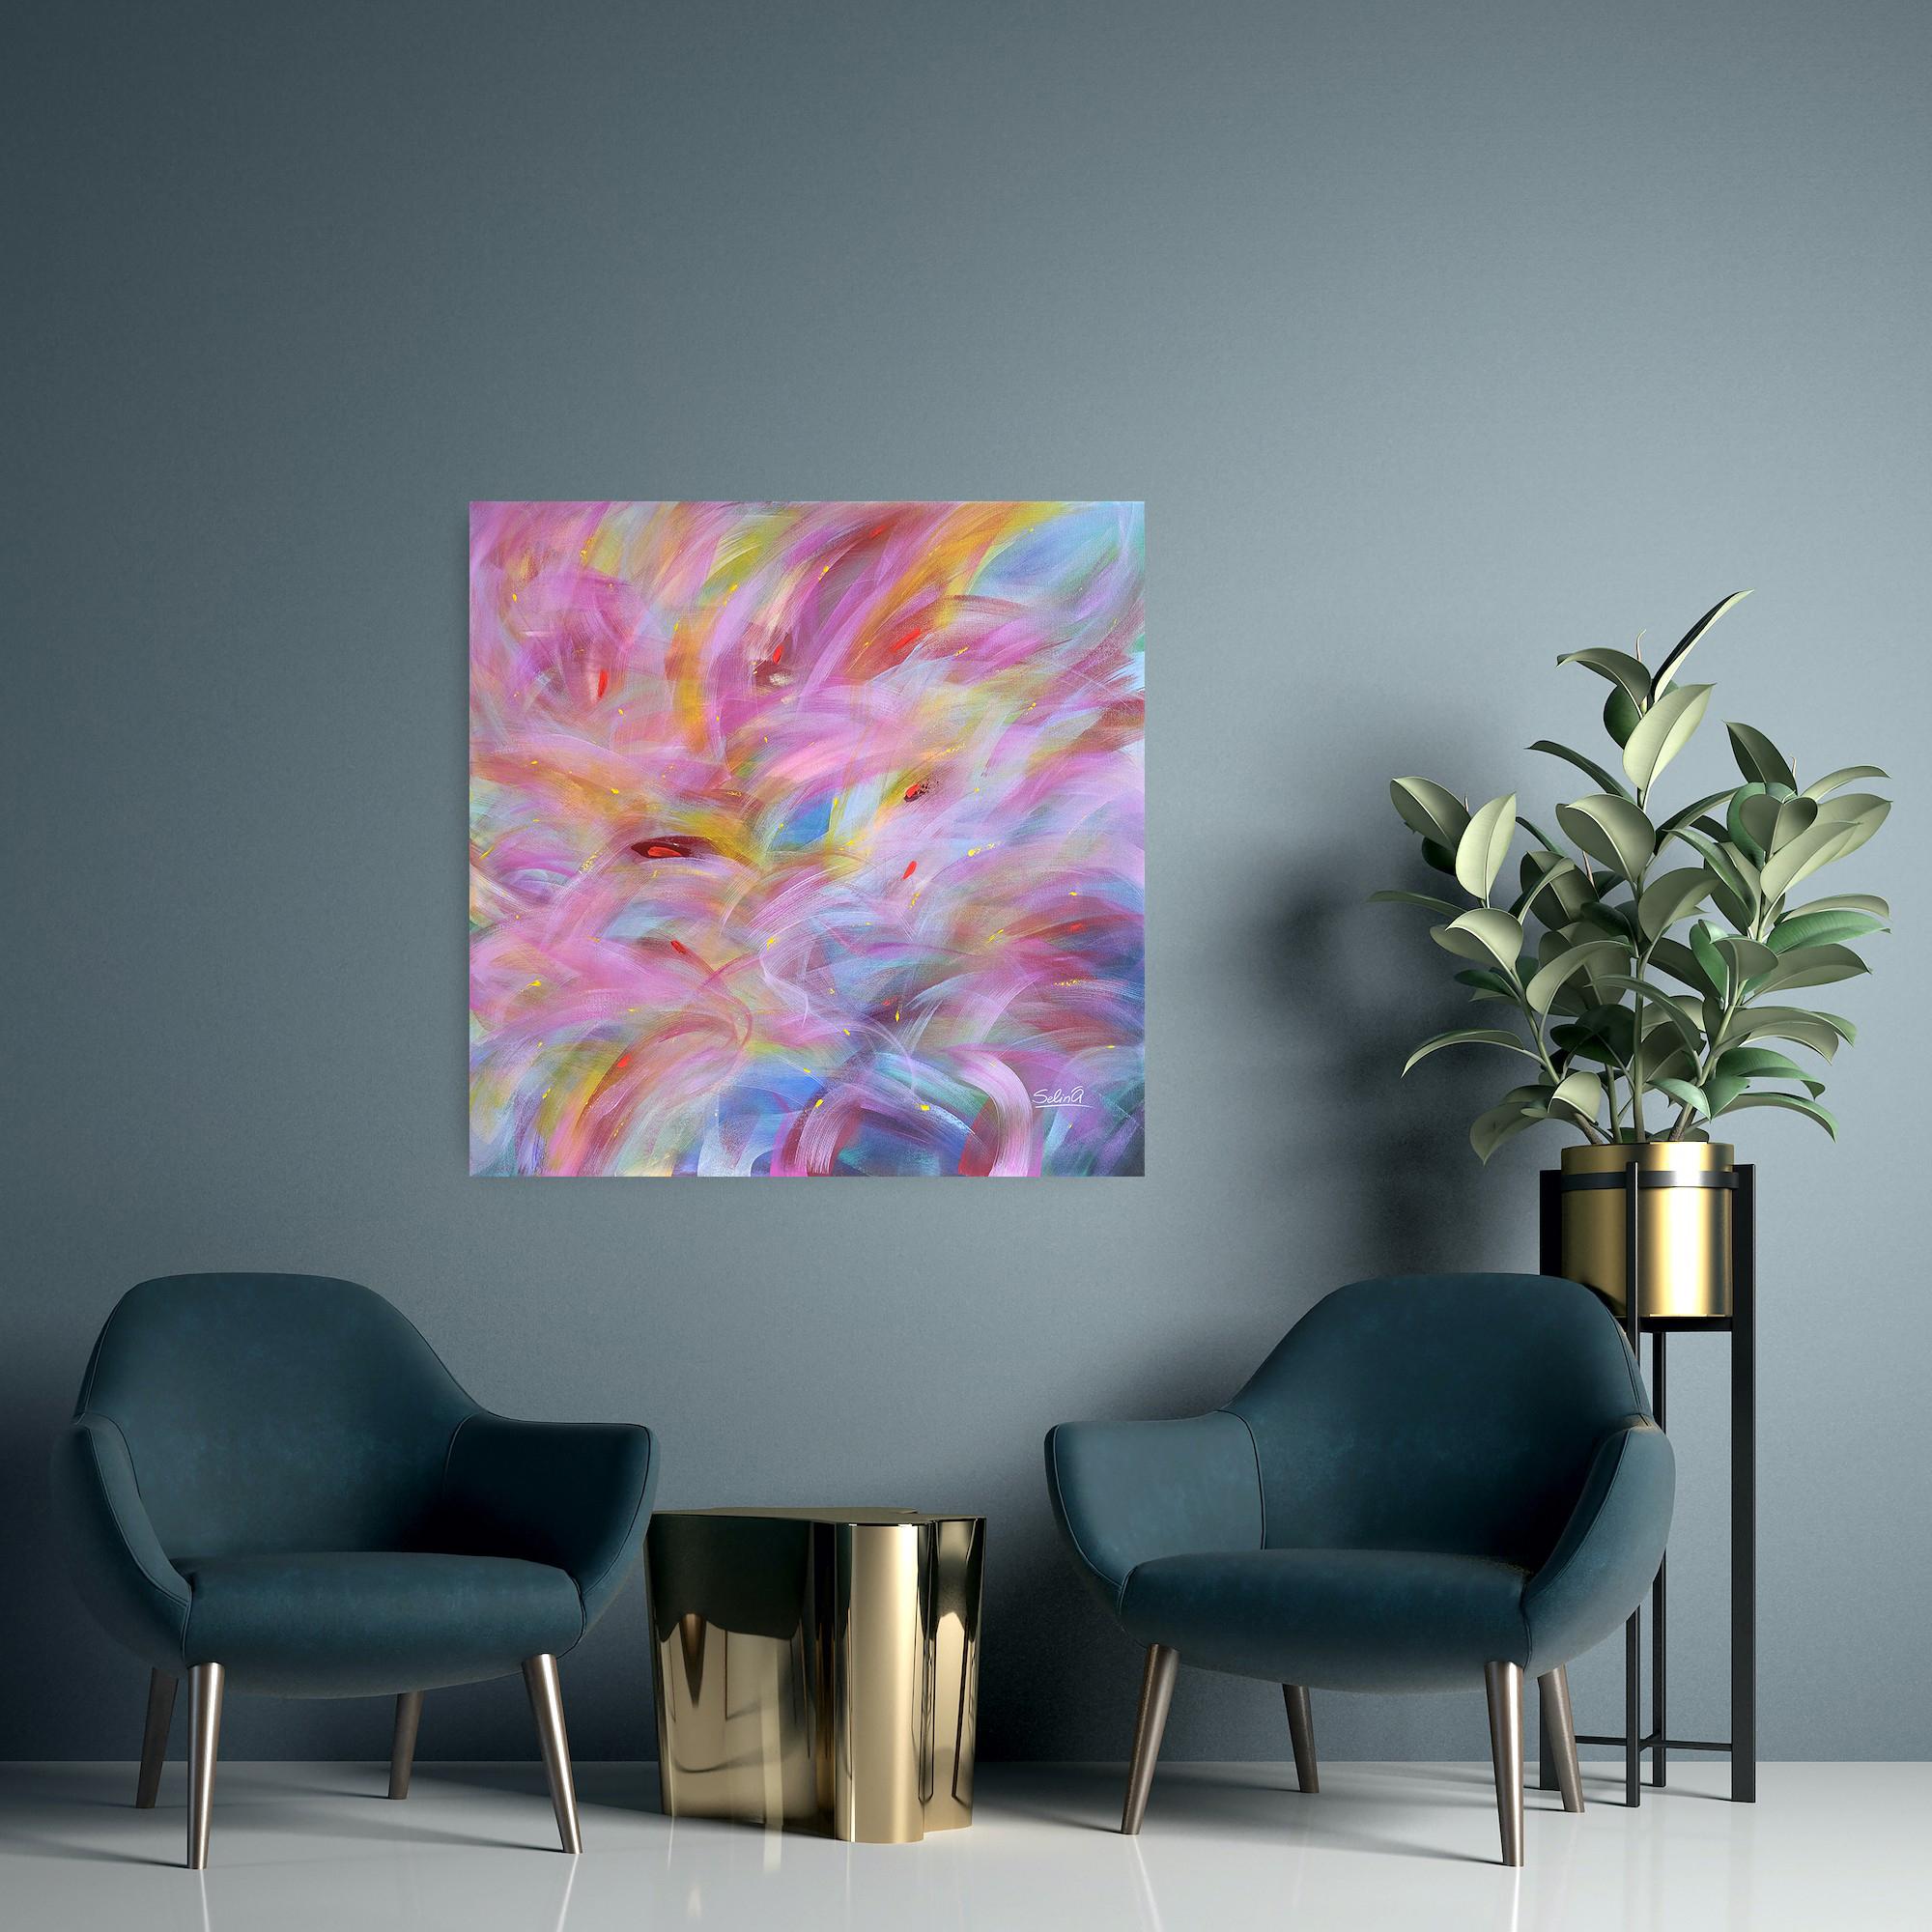 Morning light, Modern Colorful Abstract Painting 100x100cm by Anna Selina For Sale 8